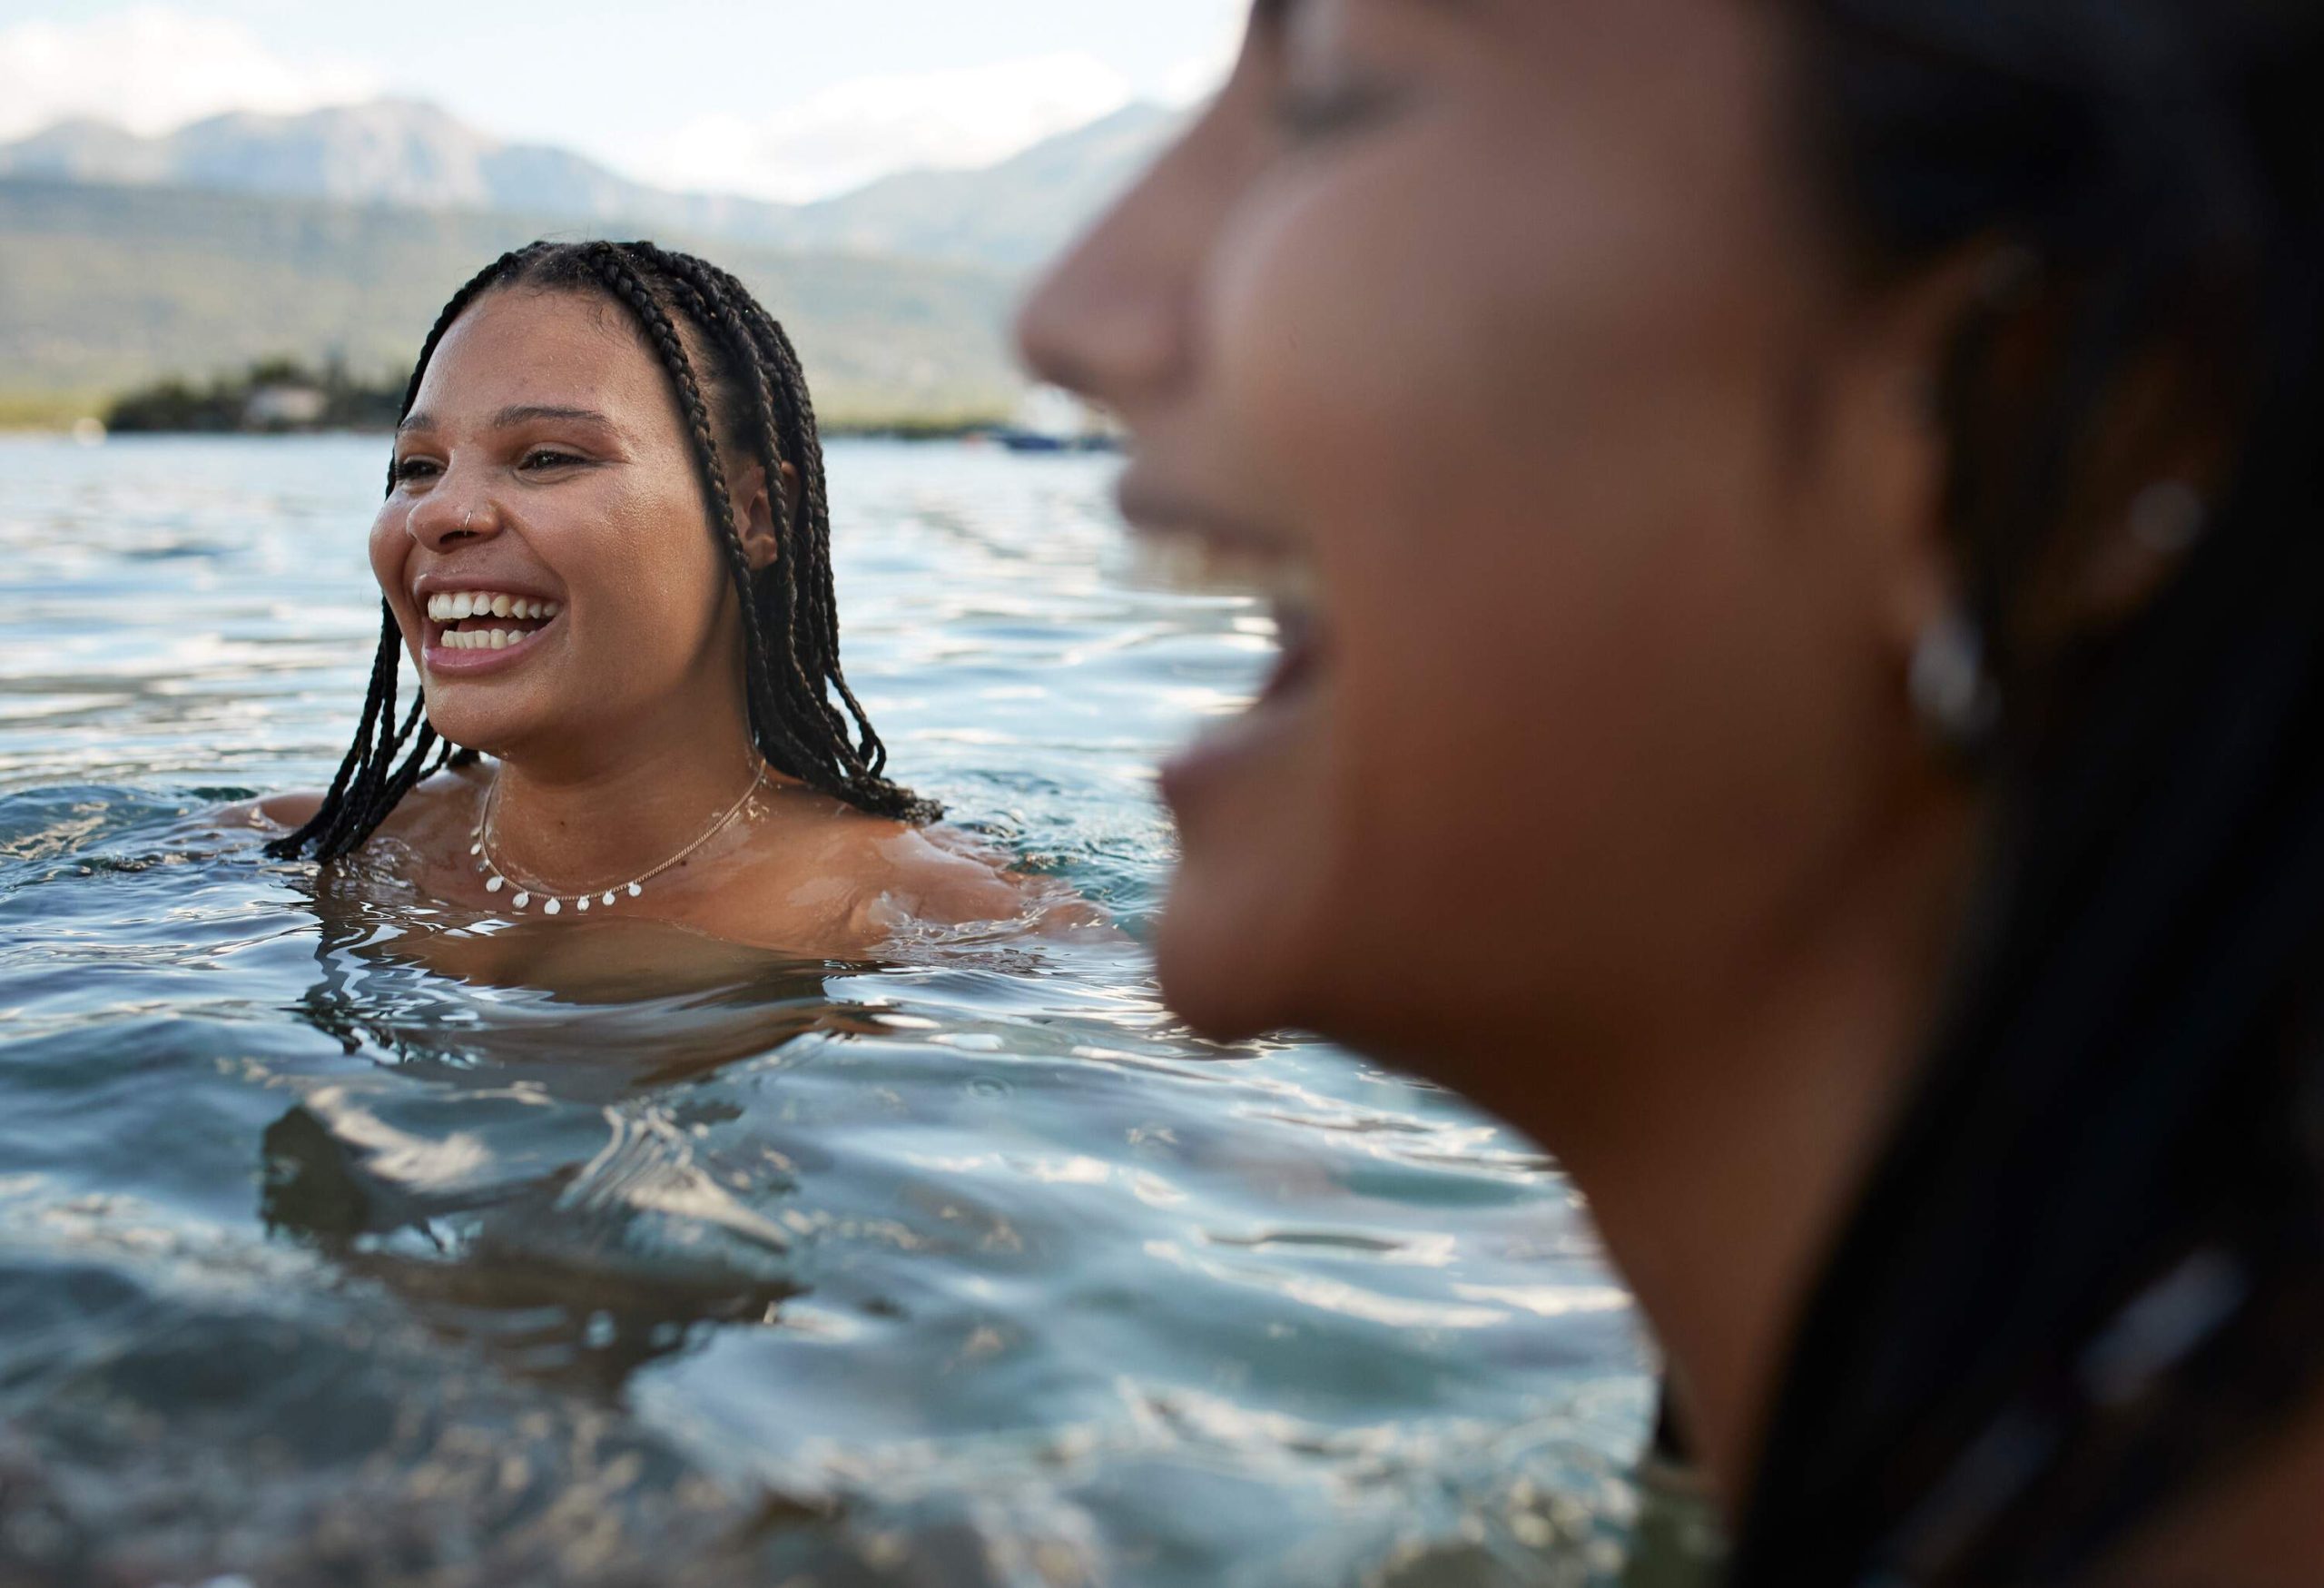 A woman with braided hair laughs with her friend while immersed in water.